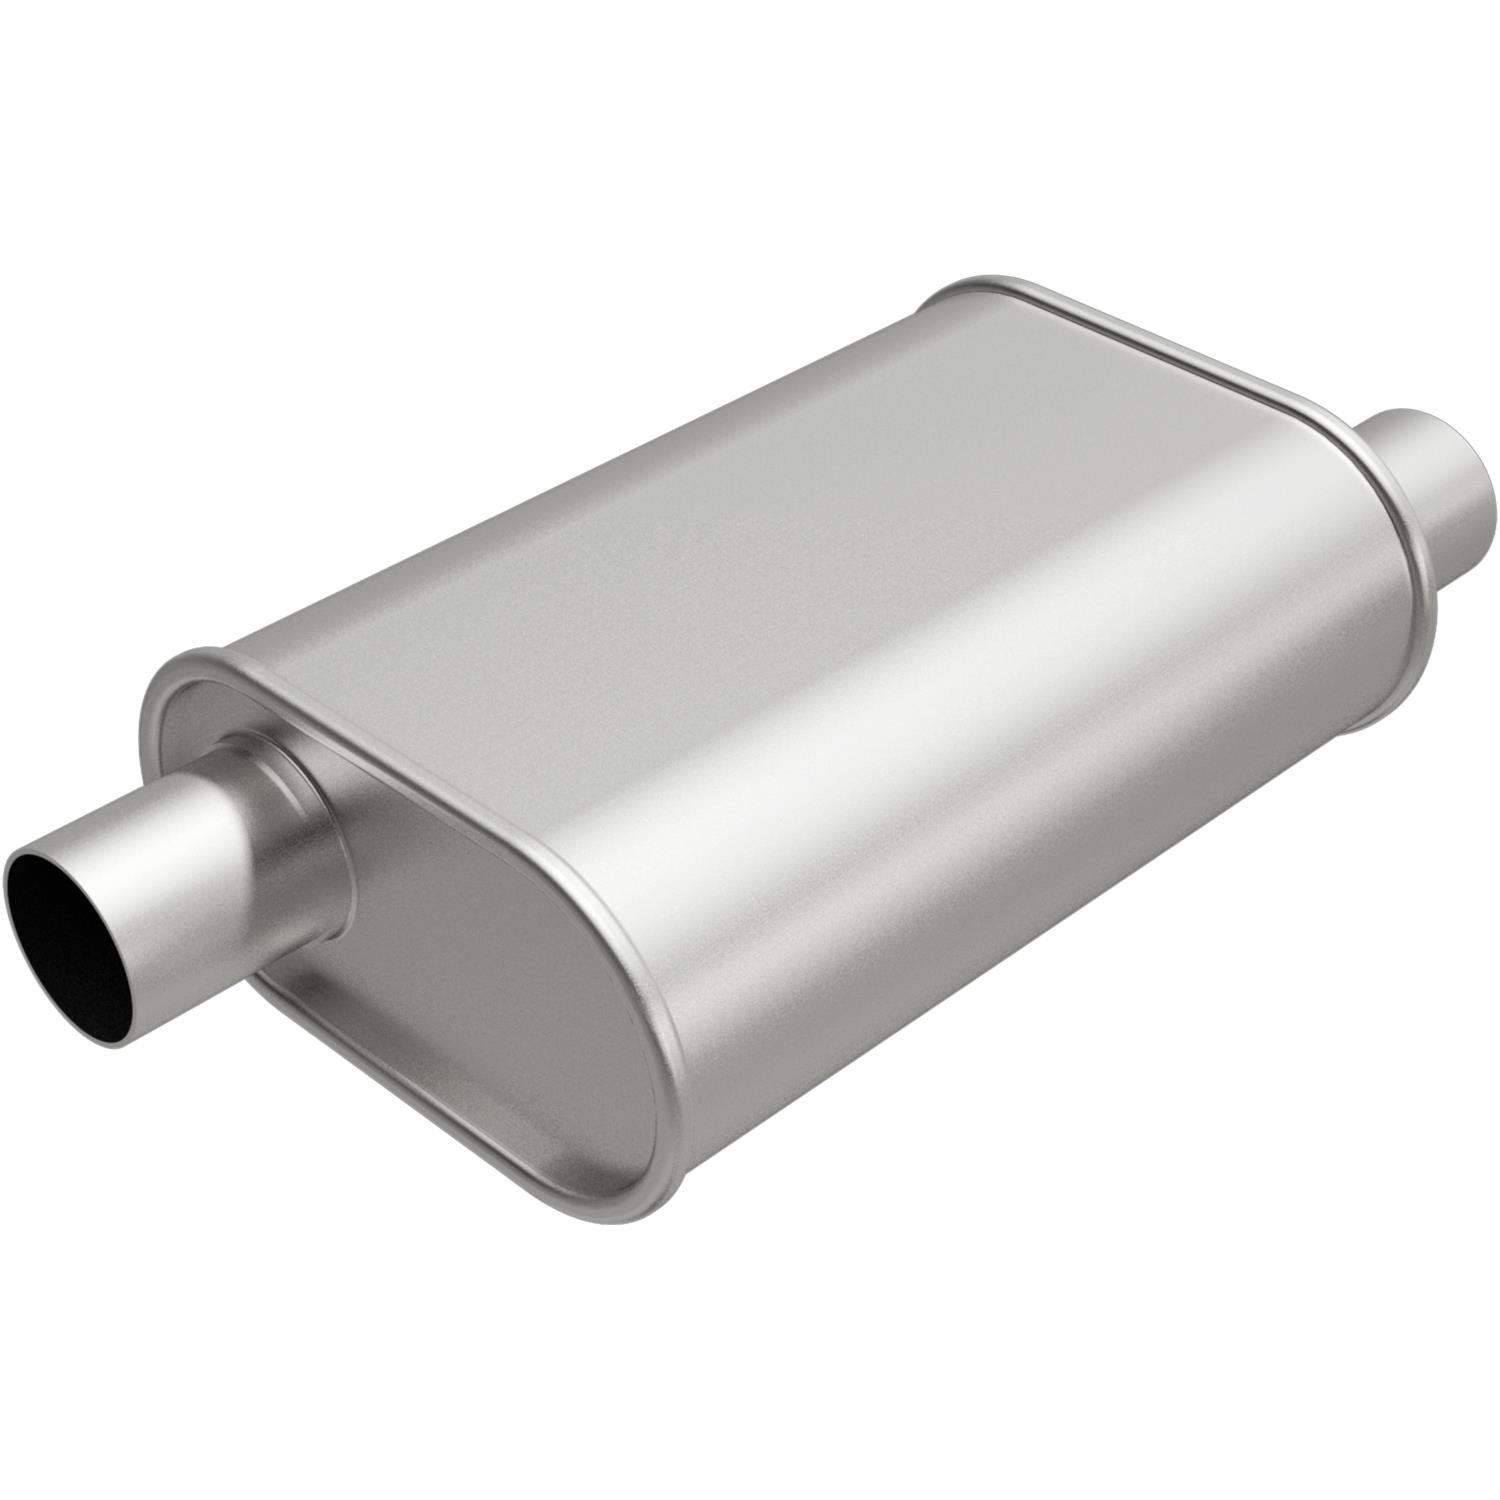 Rumble Chamber Muffler Offset In/Offset Out: 2"/2" Body Length: 7.75" Overall Length: 11"